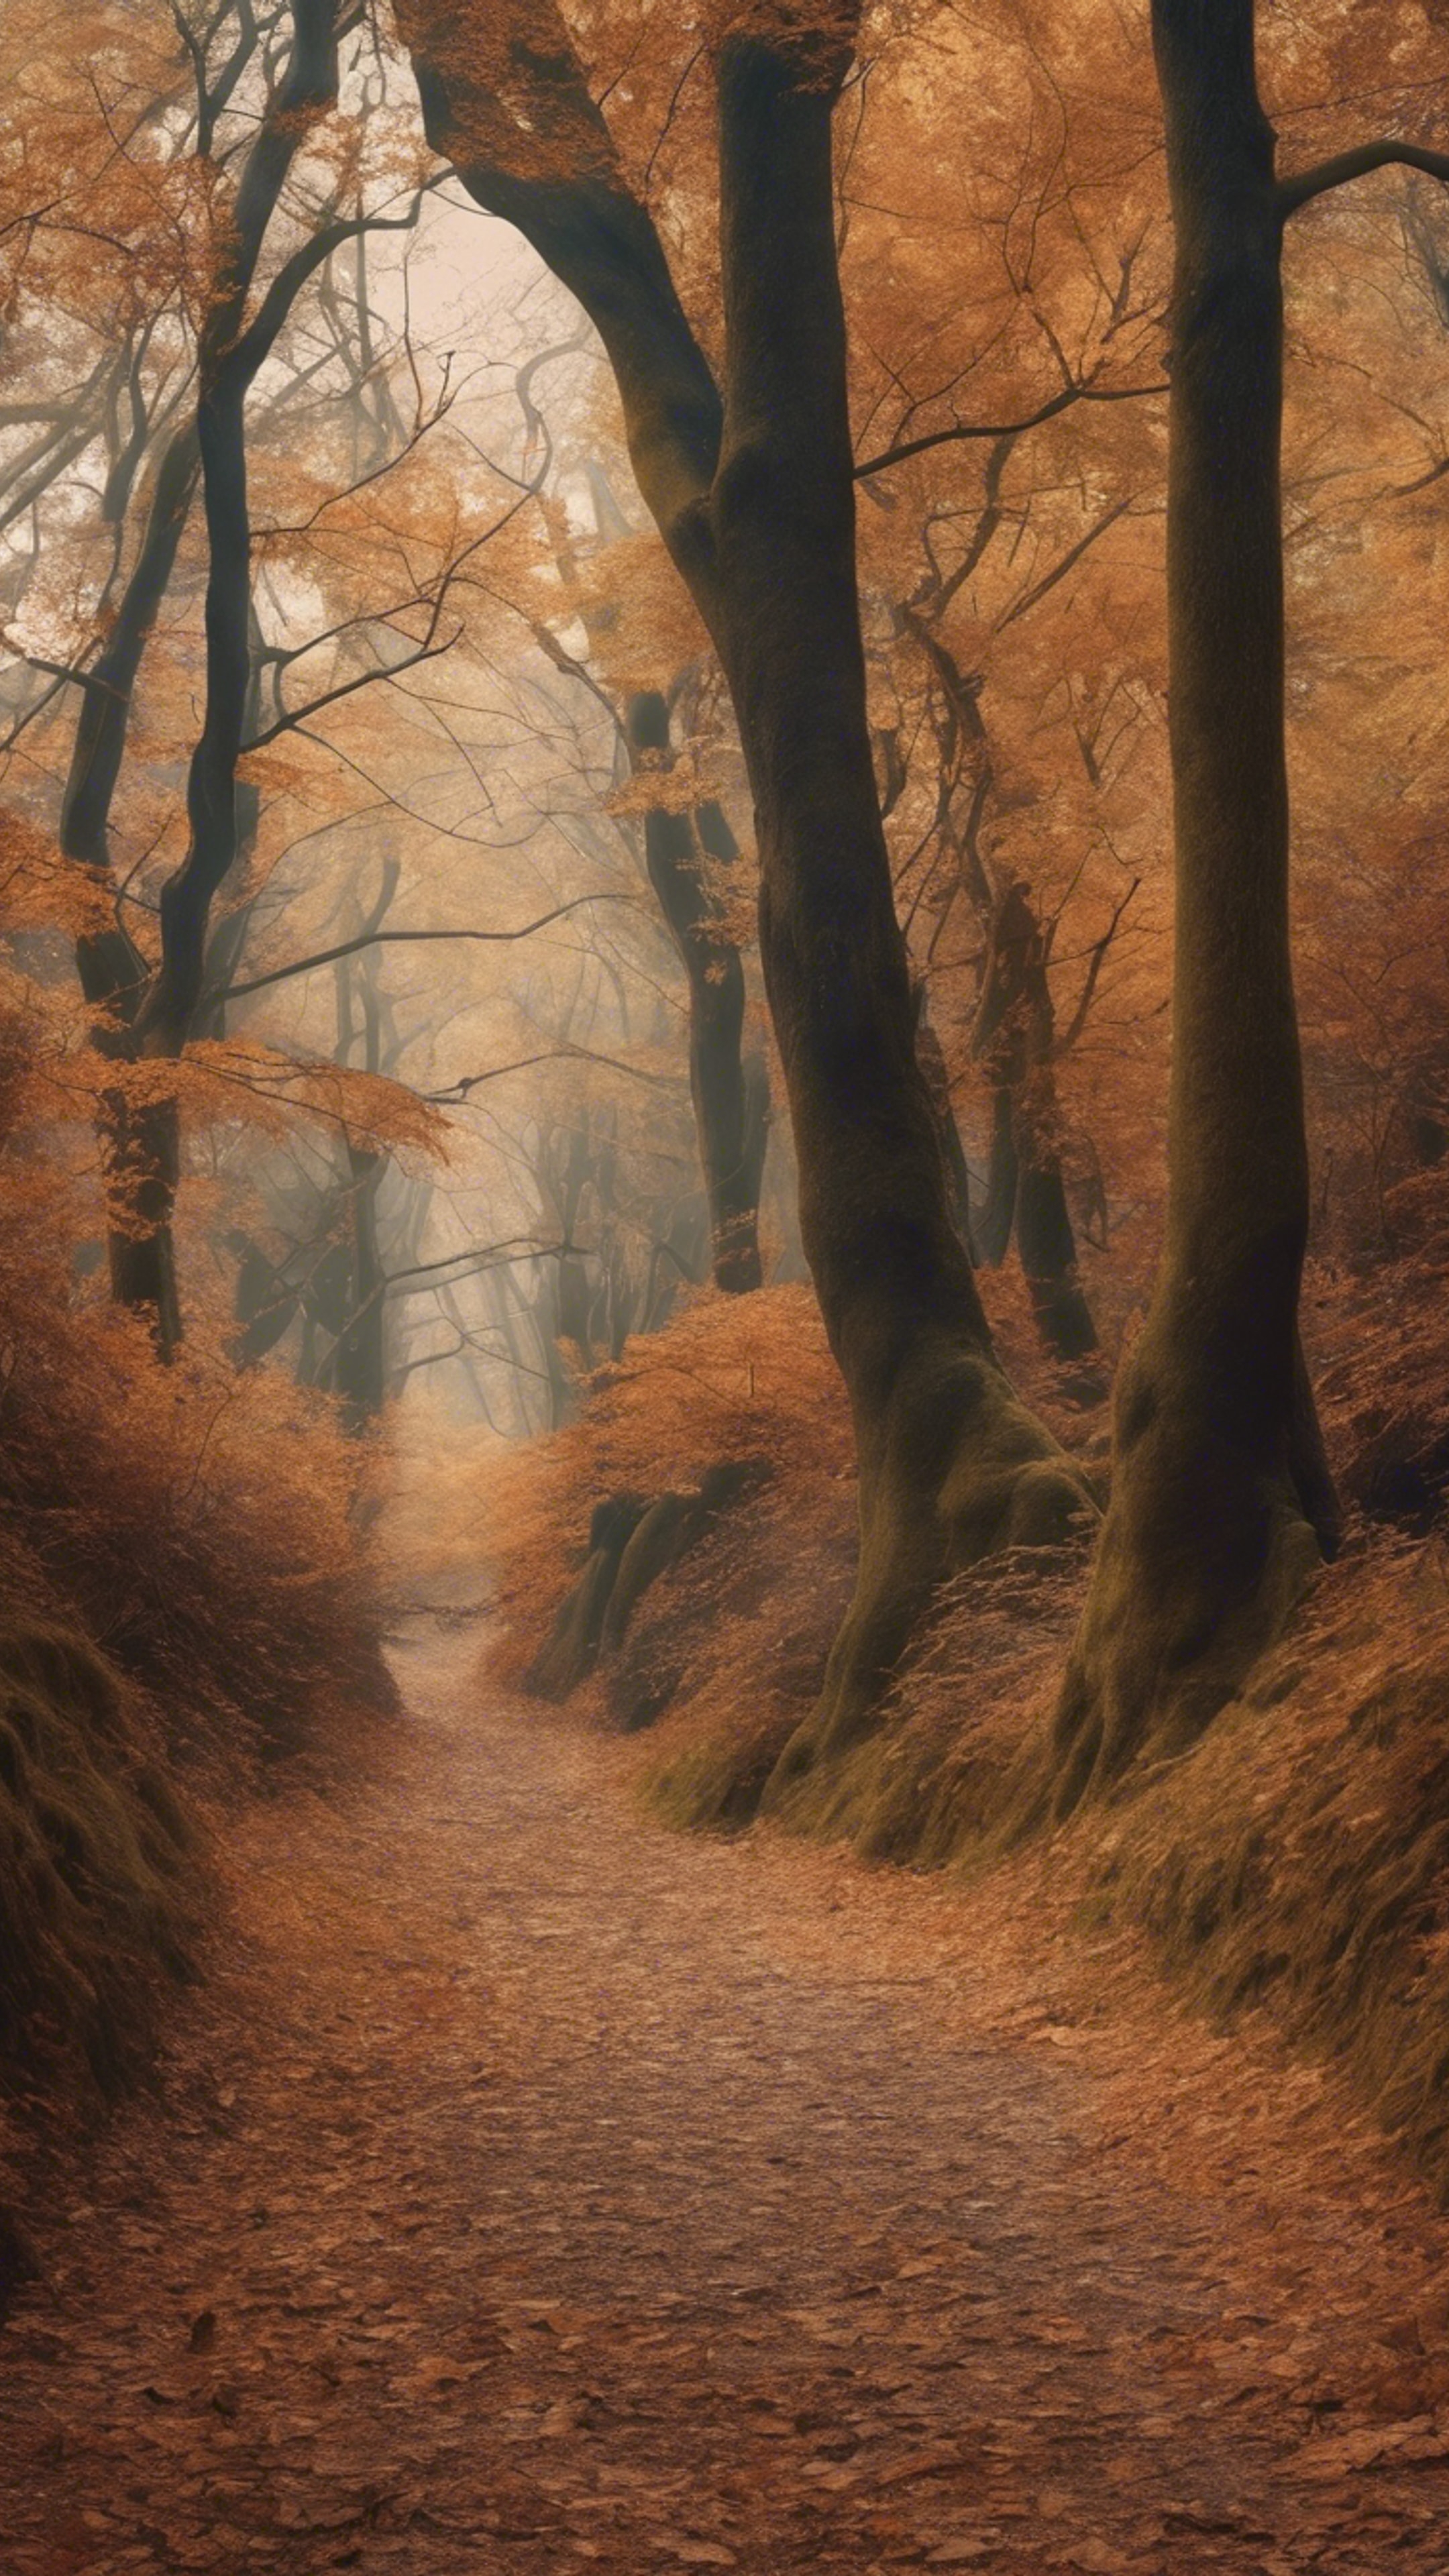 A mystic forest path covered in crunchy brown autumn leaves壁紙[44e03b30ee0343628942]